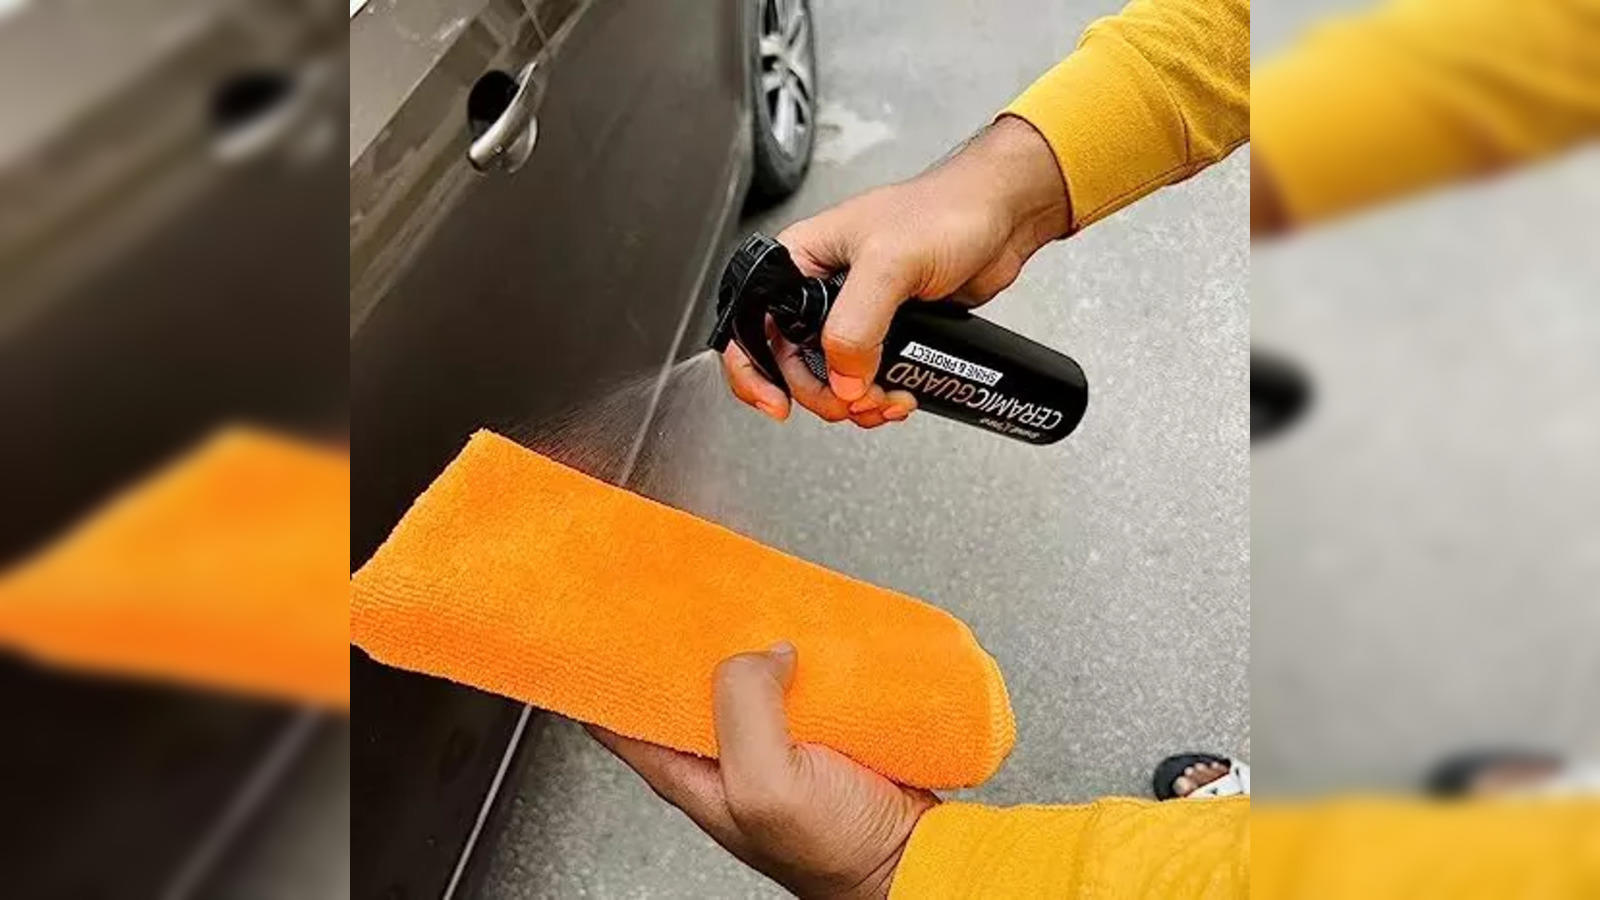 Best car polish that keeps your car as good as new